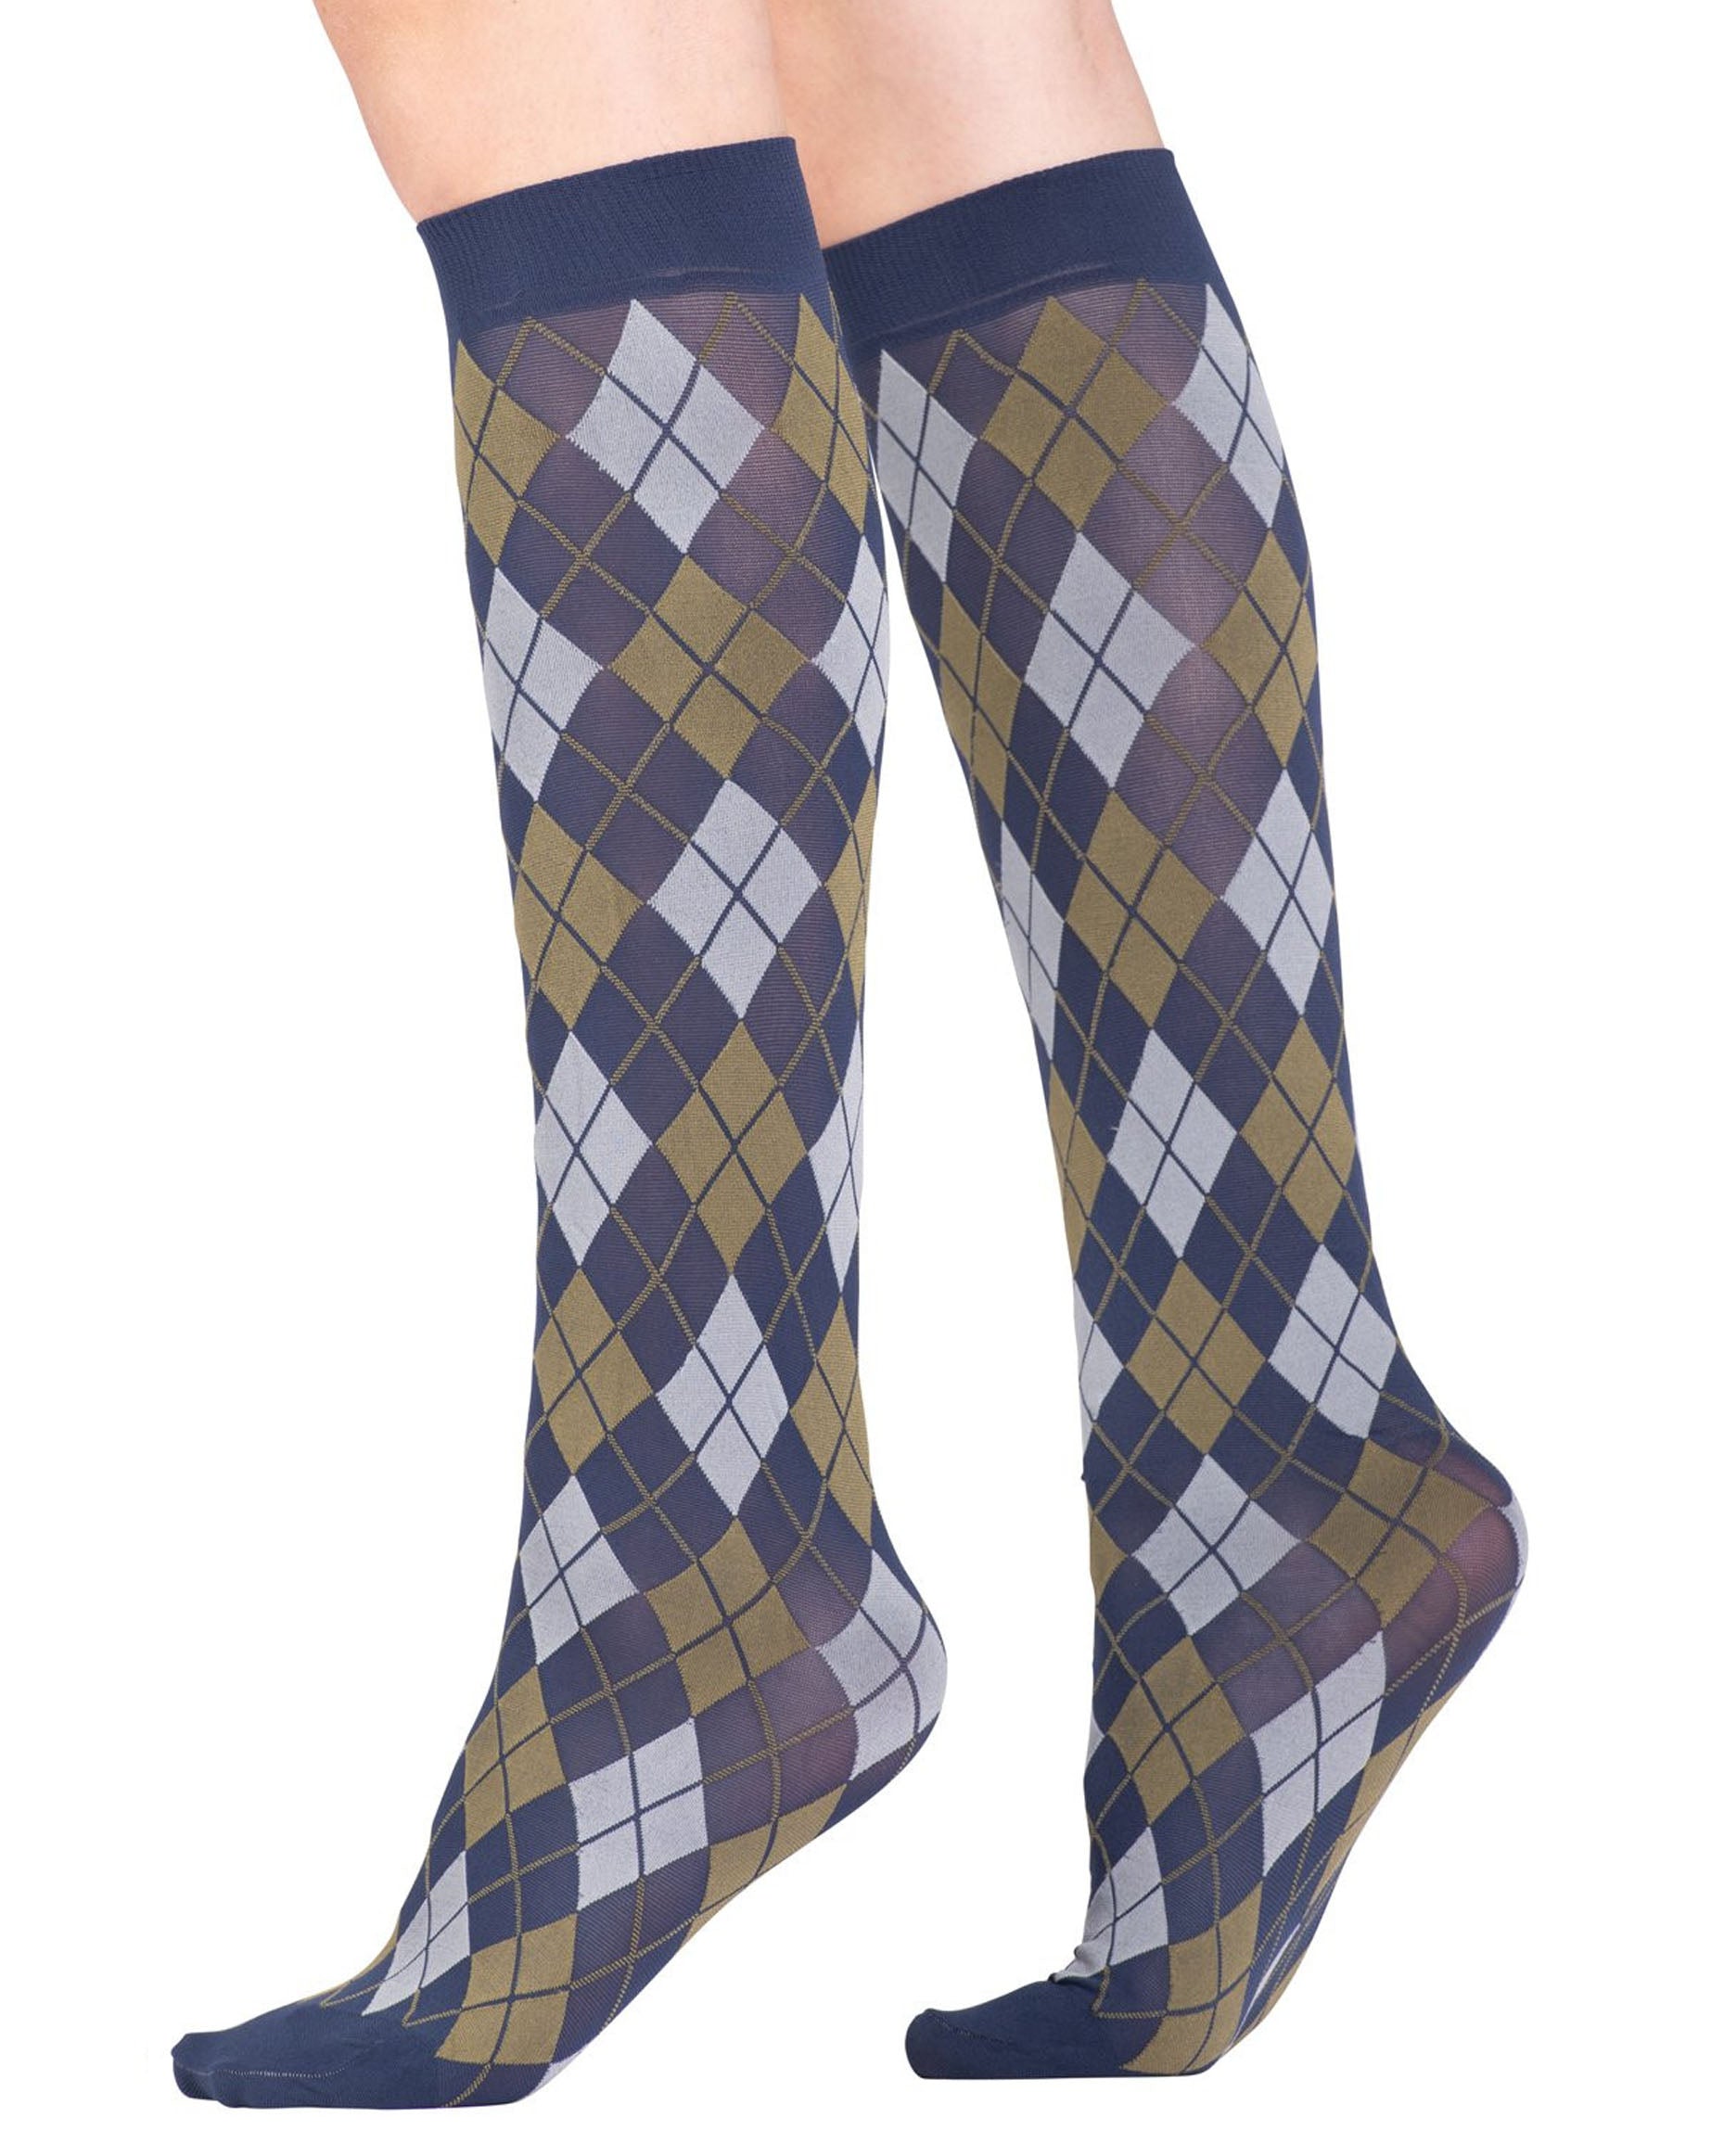 Emilio Cavallini Argyle Socks - Matte navy blue opaque fashion knee-high socks with a diamond argyle pattern in khaki green and light grey, deep elasticated cuff and reinforced toe.